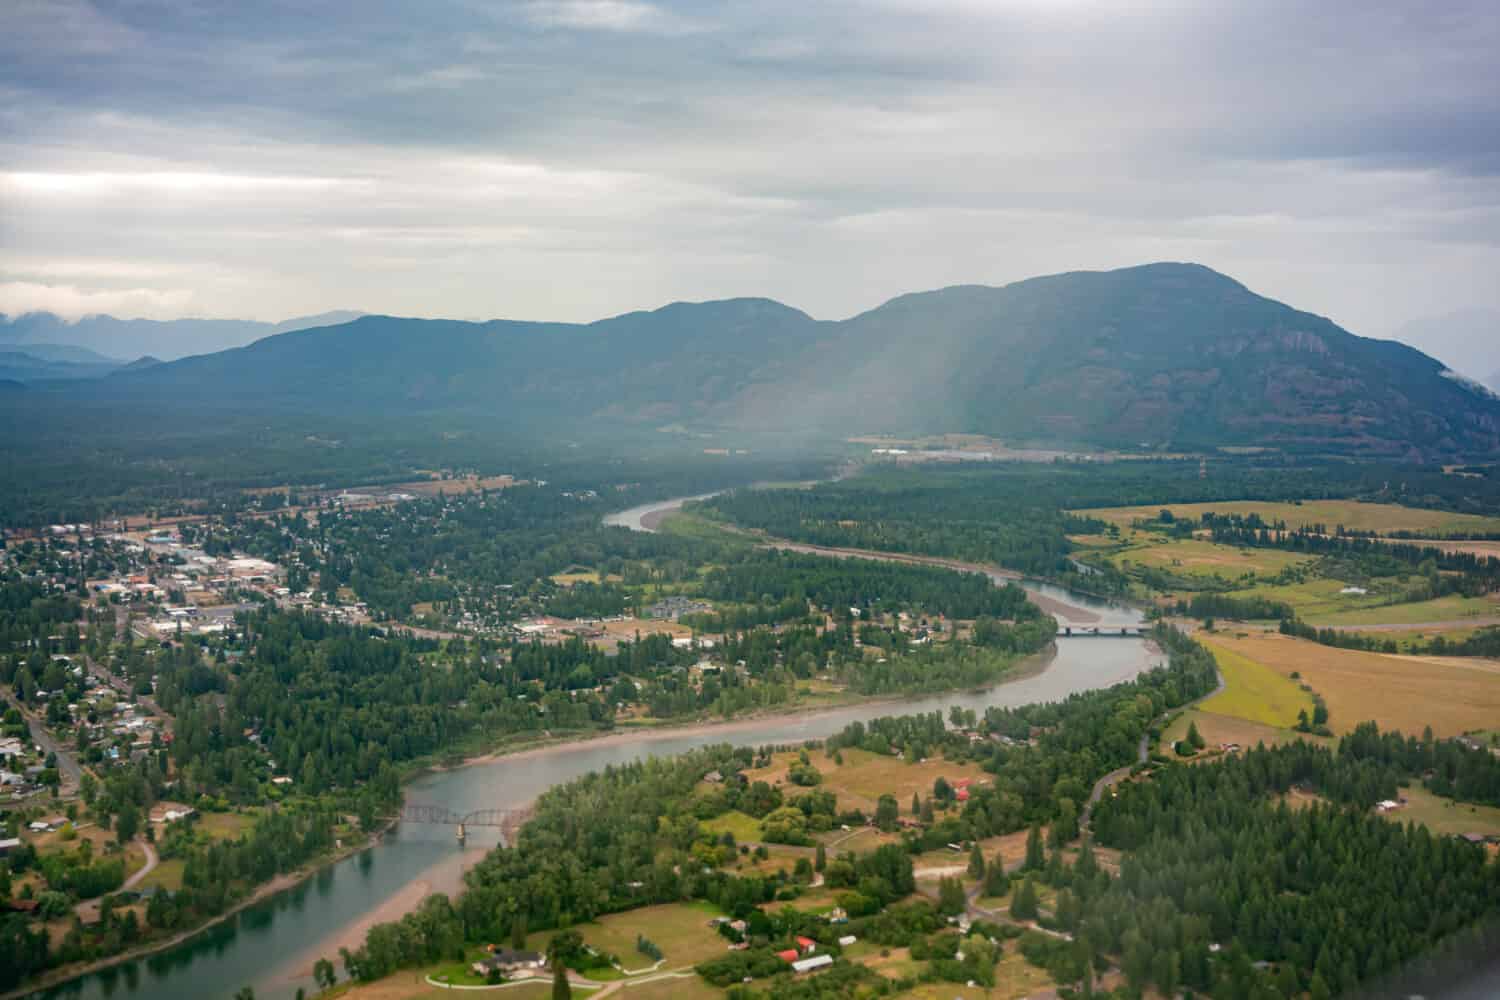 Aerial view of some beautiful landscape around Kalispell country side.